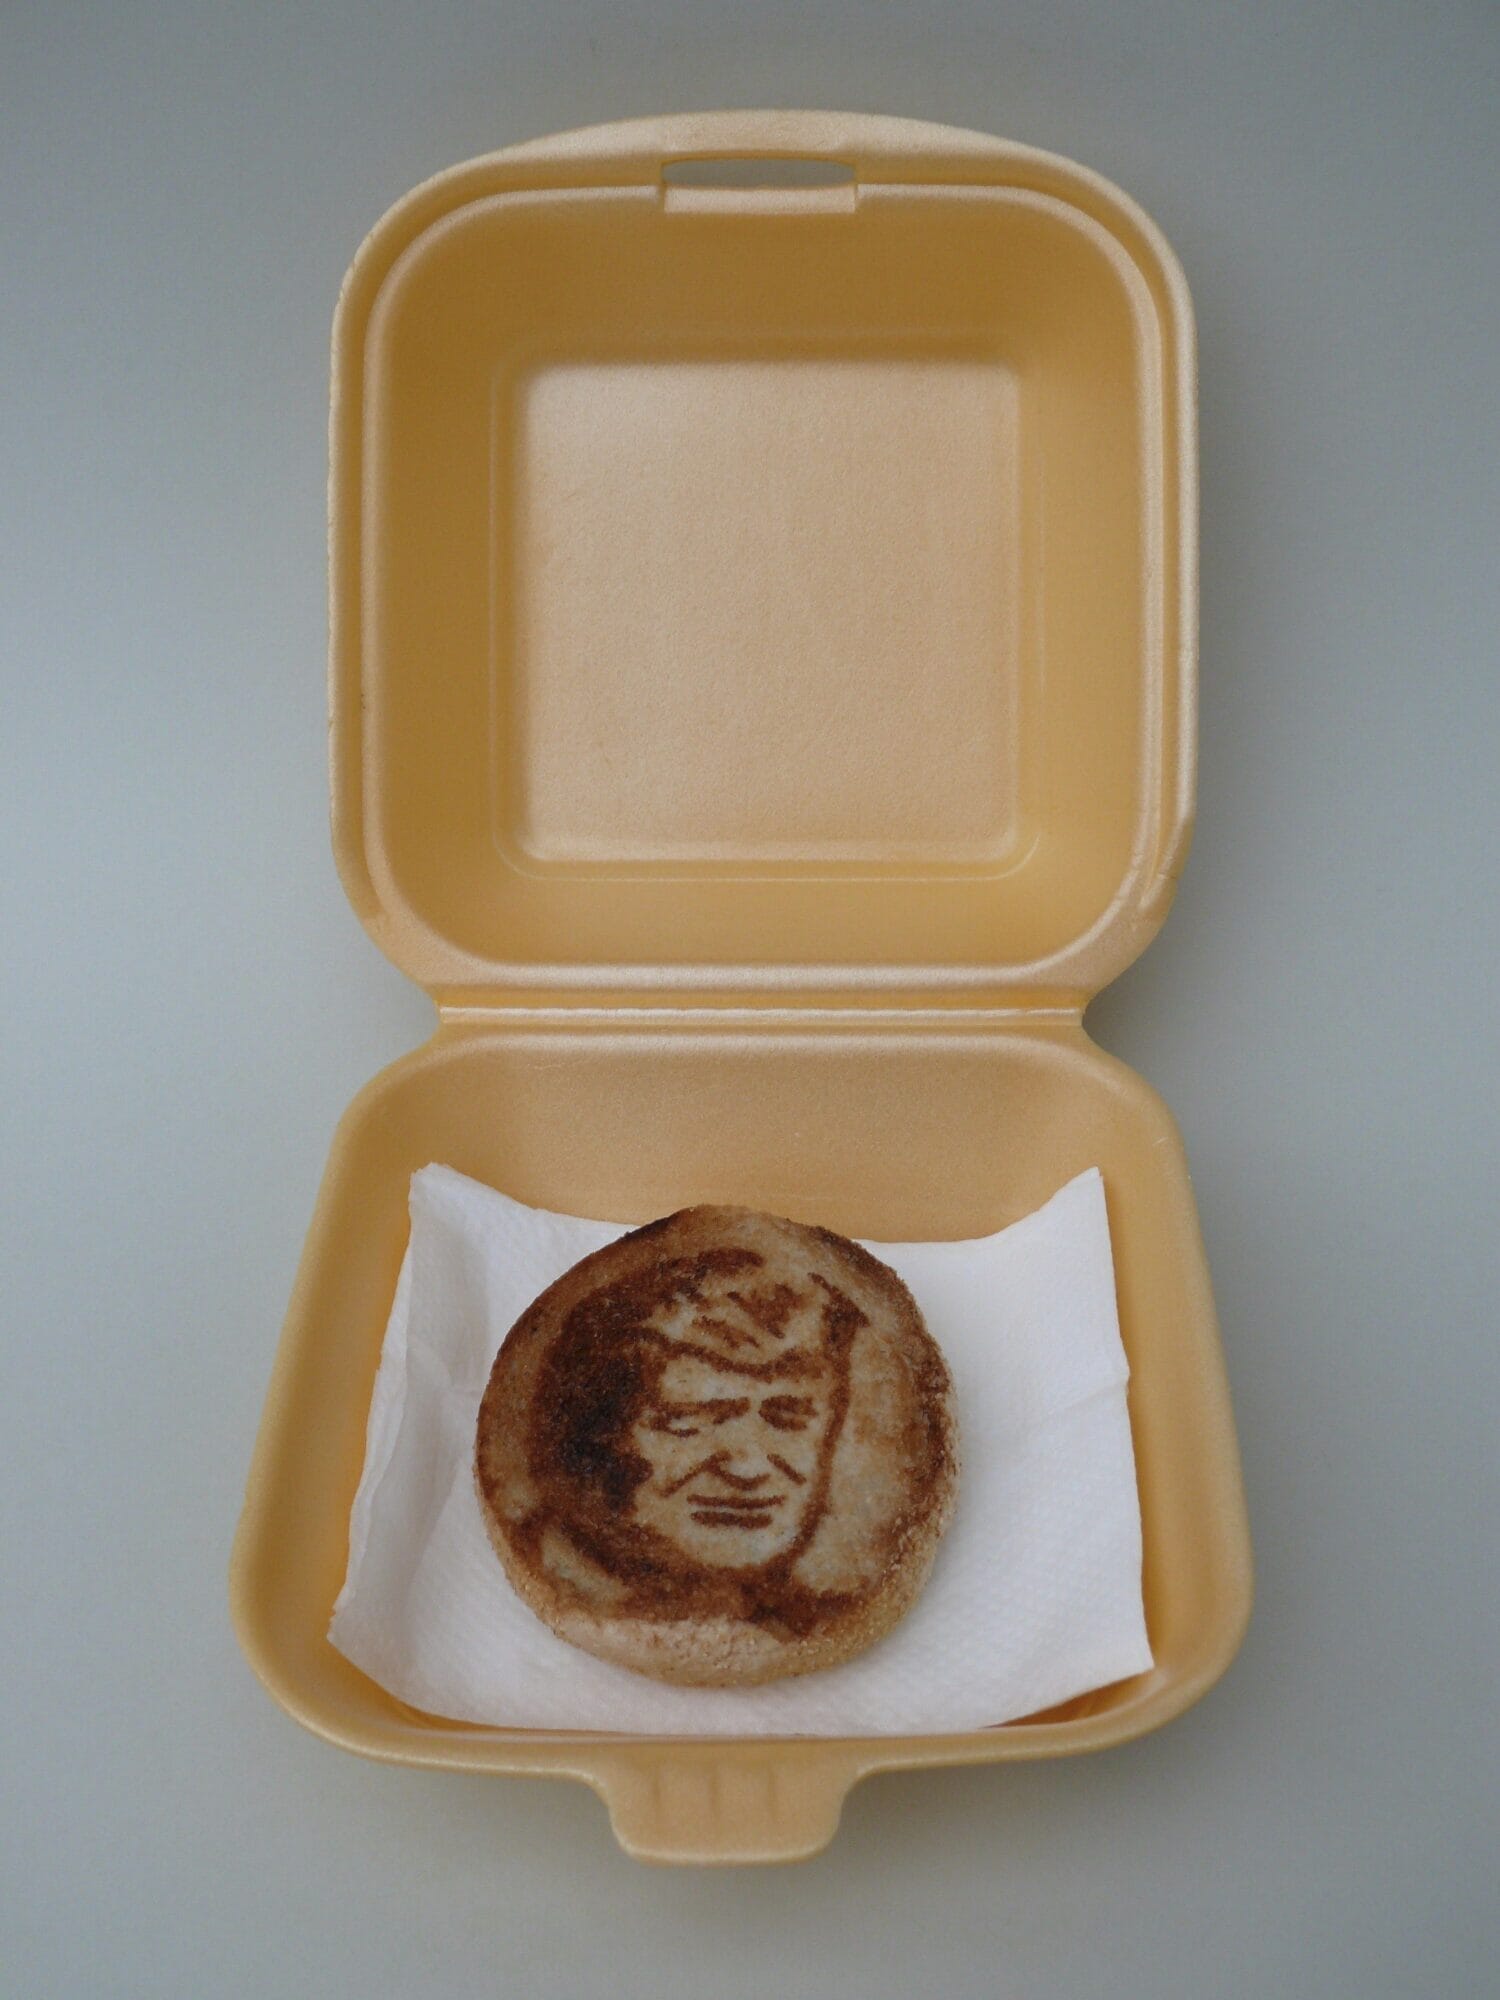  Reliquary, Efes Toasted Burger Muffin Donald Trump Apparition